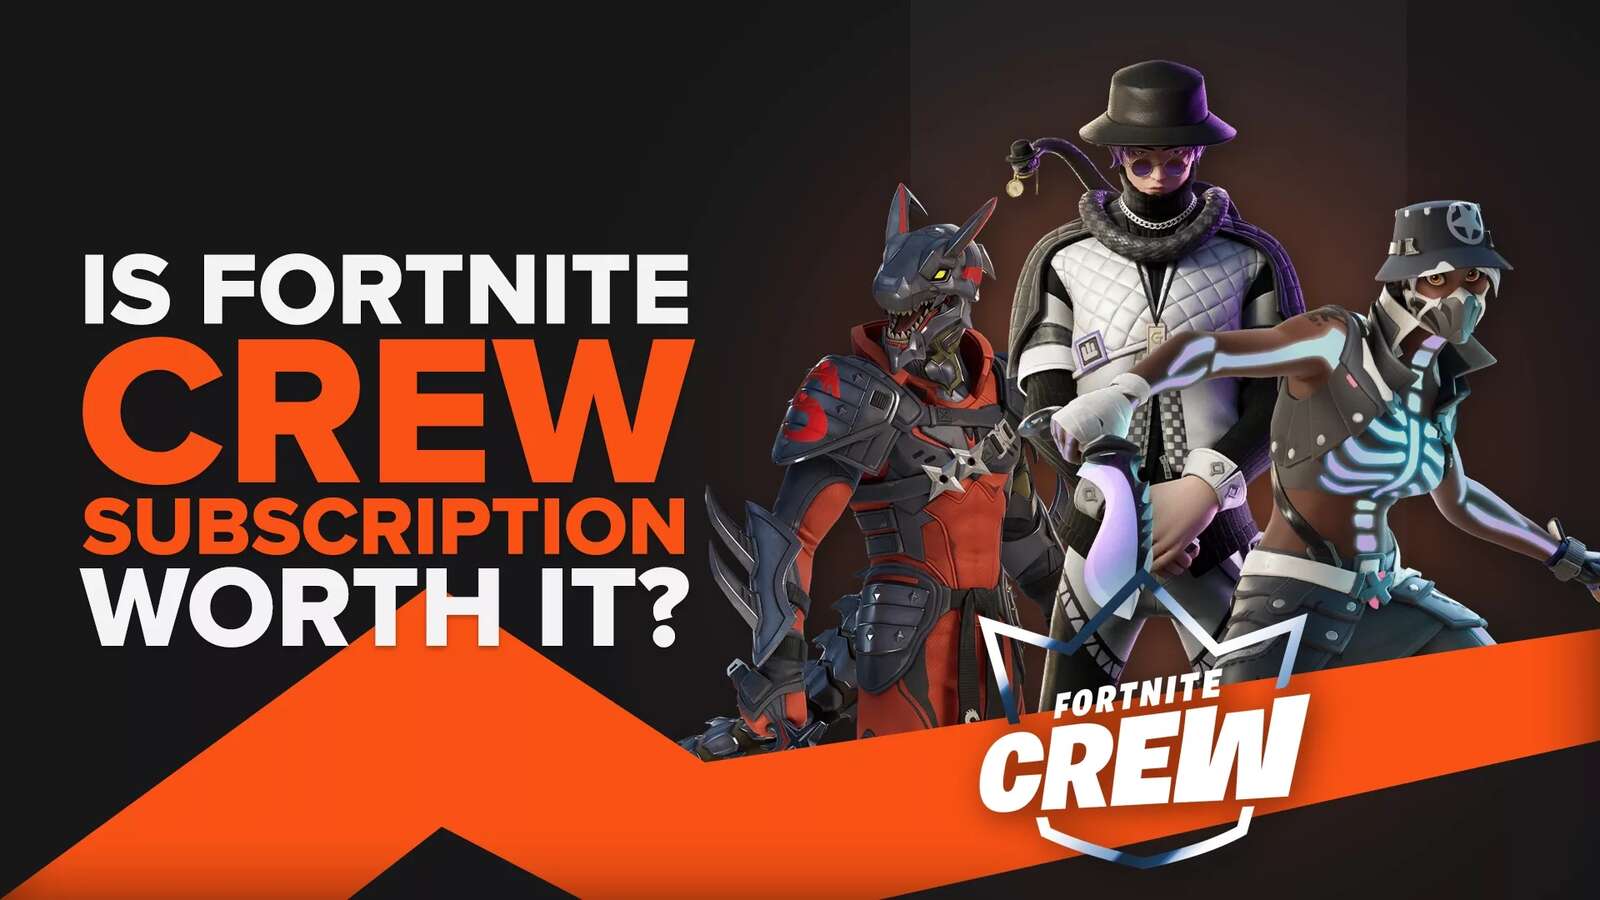 Is Fortnite Crew Subscription Worth It? [Analysis]